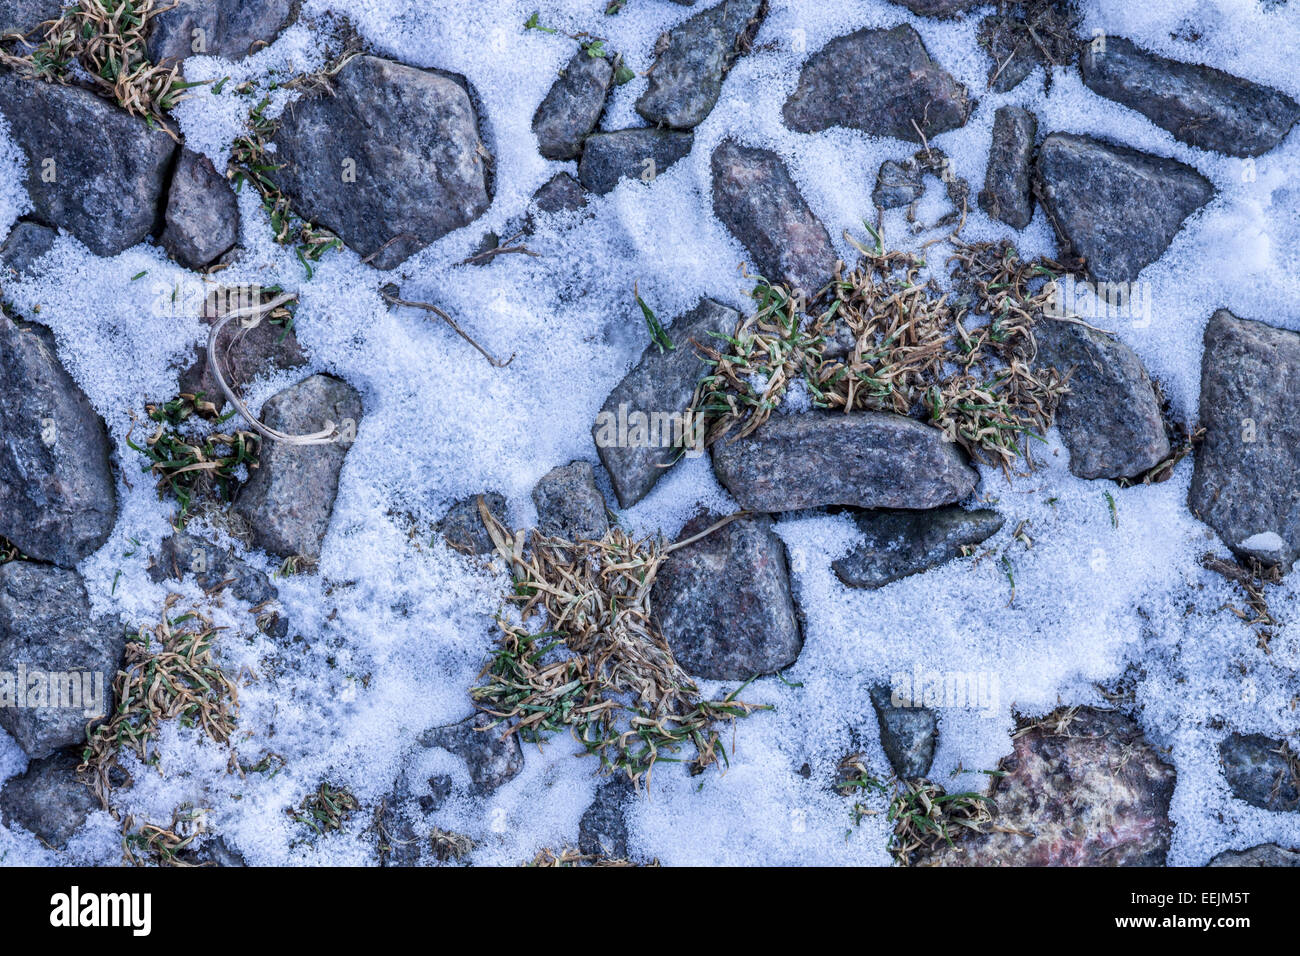 Abstract Winter Texture Background Stones Snow And Ice In Nature Pattern Close Up Image Stock Photo Alamy